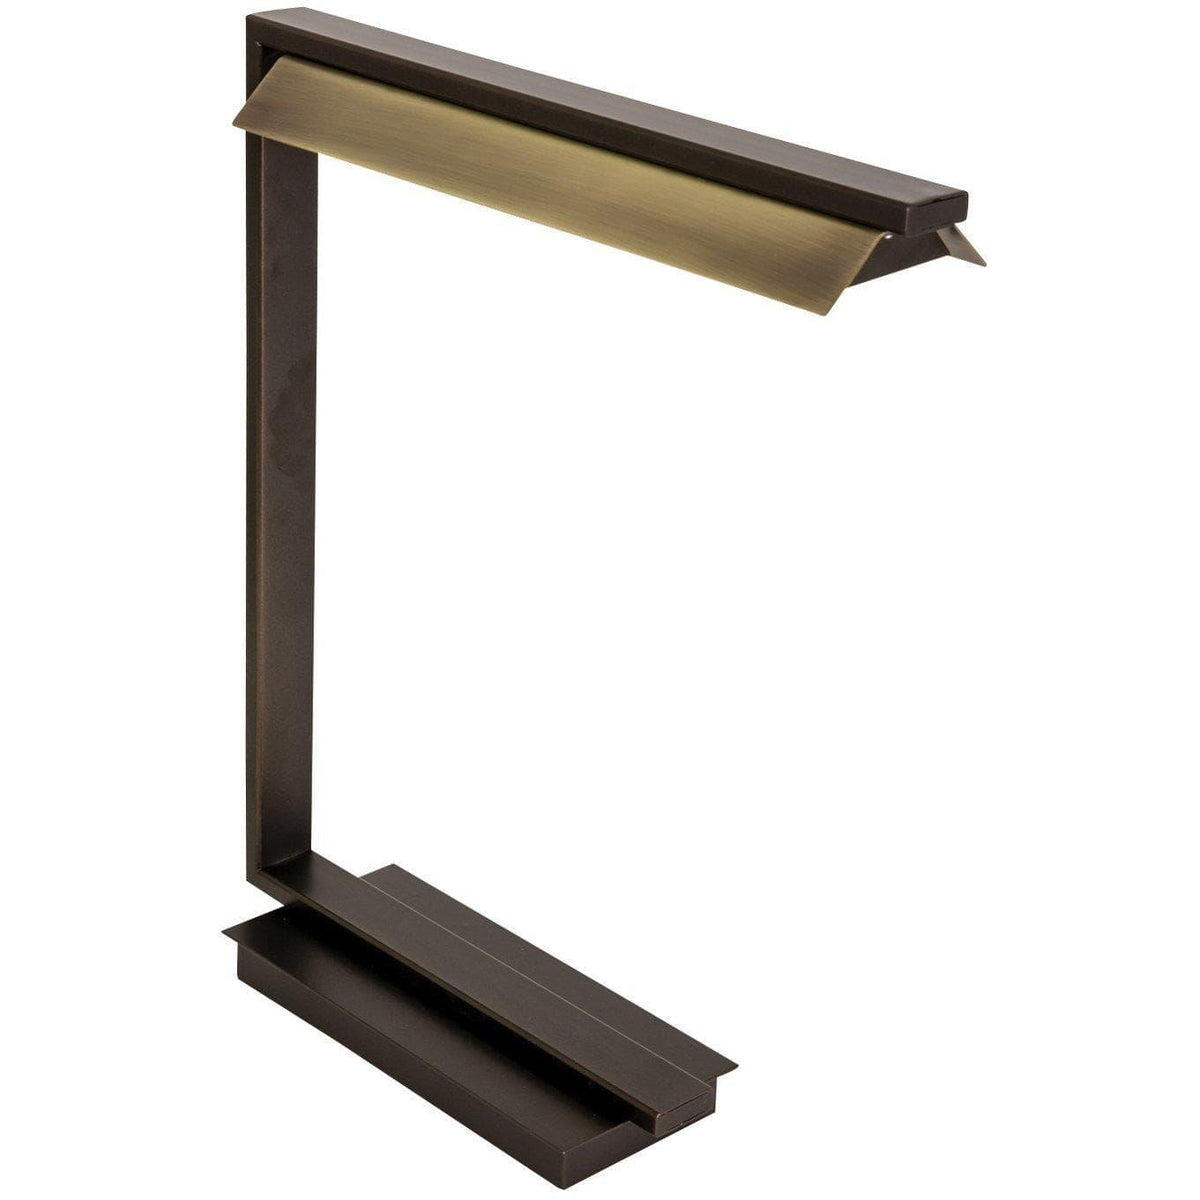 House of Troy - Jay LED Table Lamp - JLED550-CHB | Montreal Lighting & Hardware